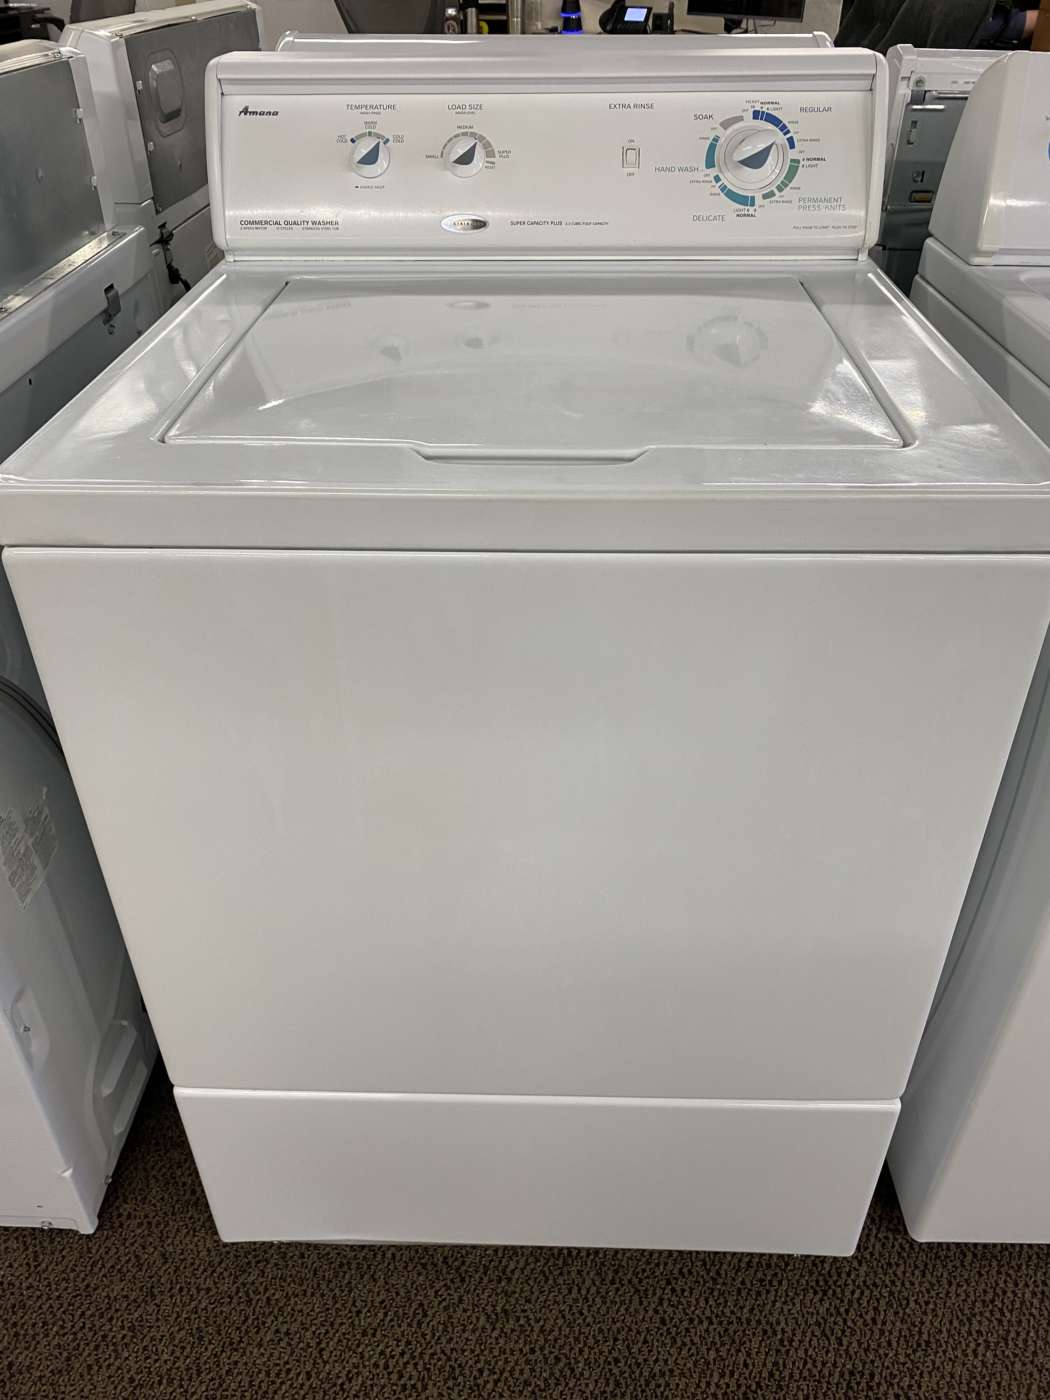 Reconditioned AMANA 3.3 Cu. Ft. Top-Load Washer – White